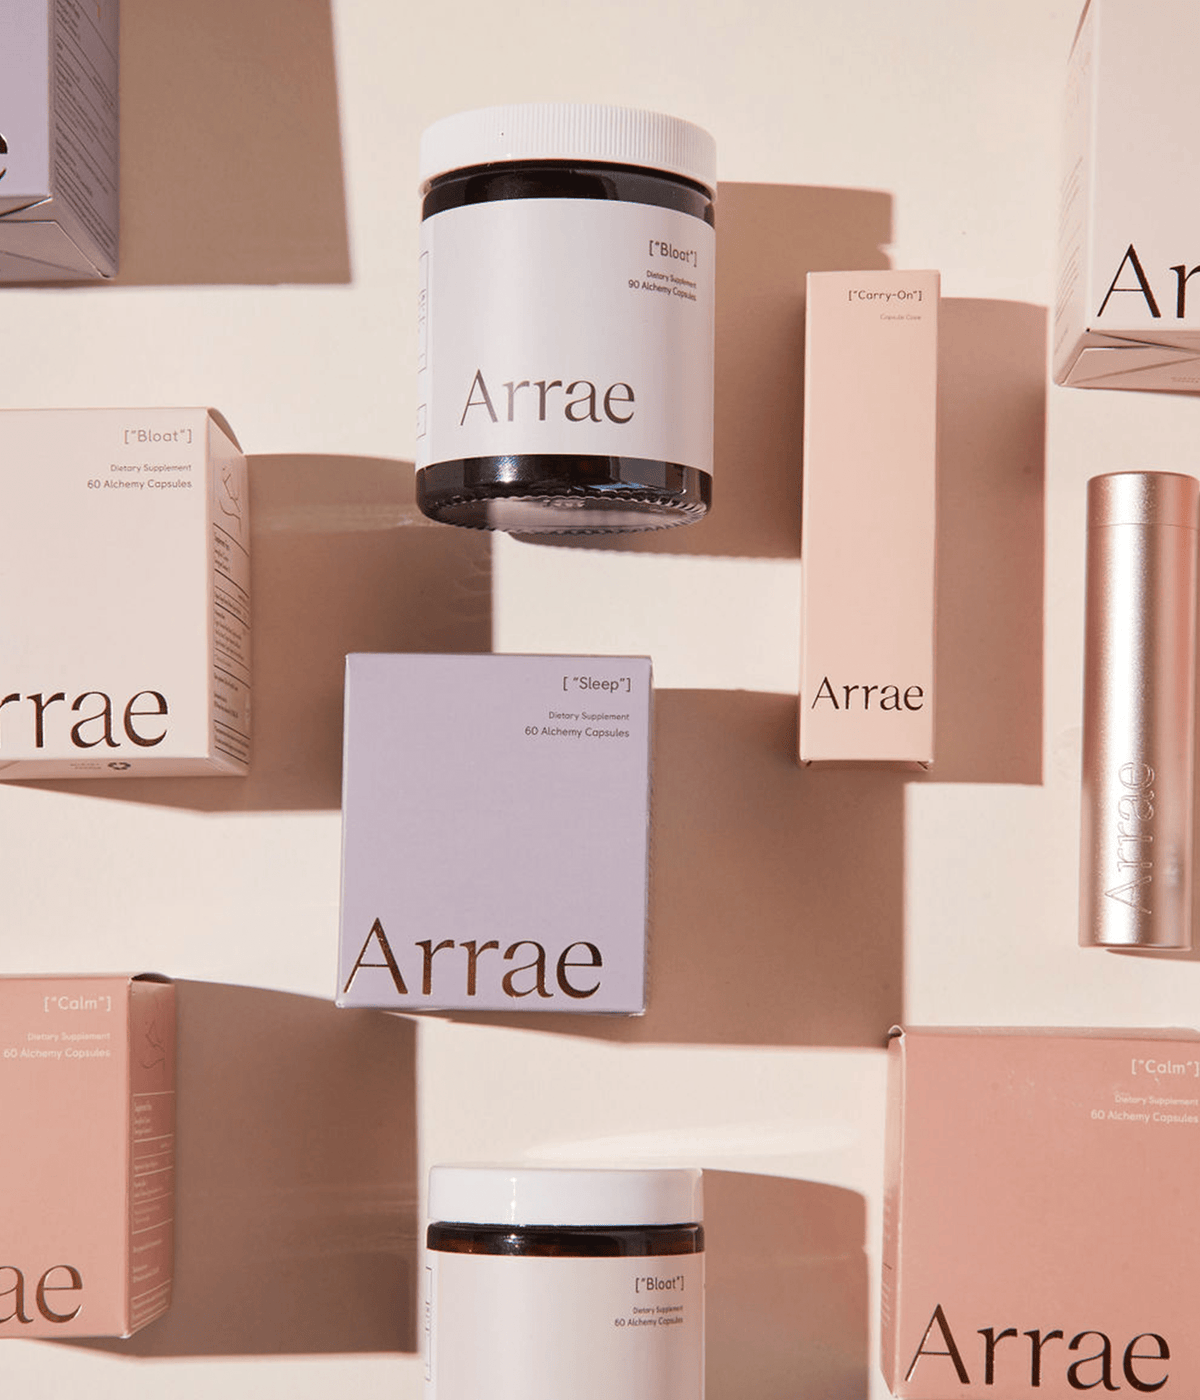 A collection of Arrae Bloat, Sleep, Calm & Carry-on Capsule Case